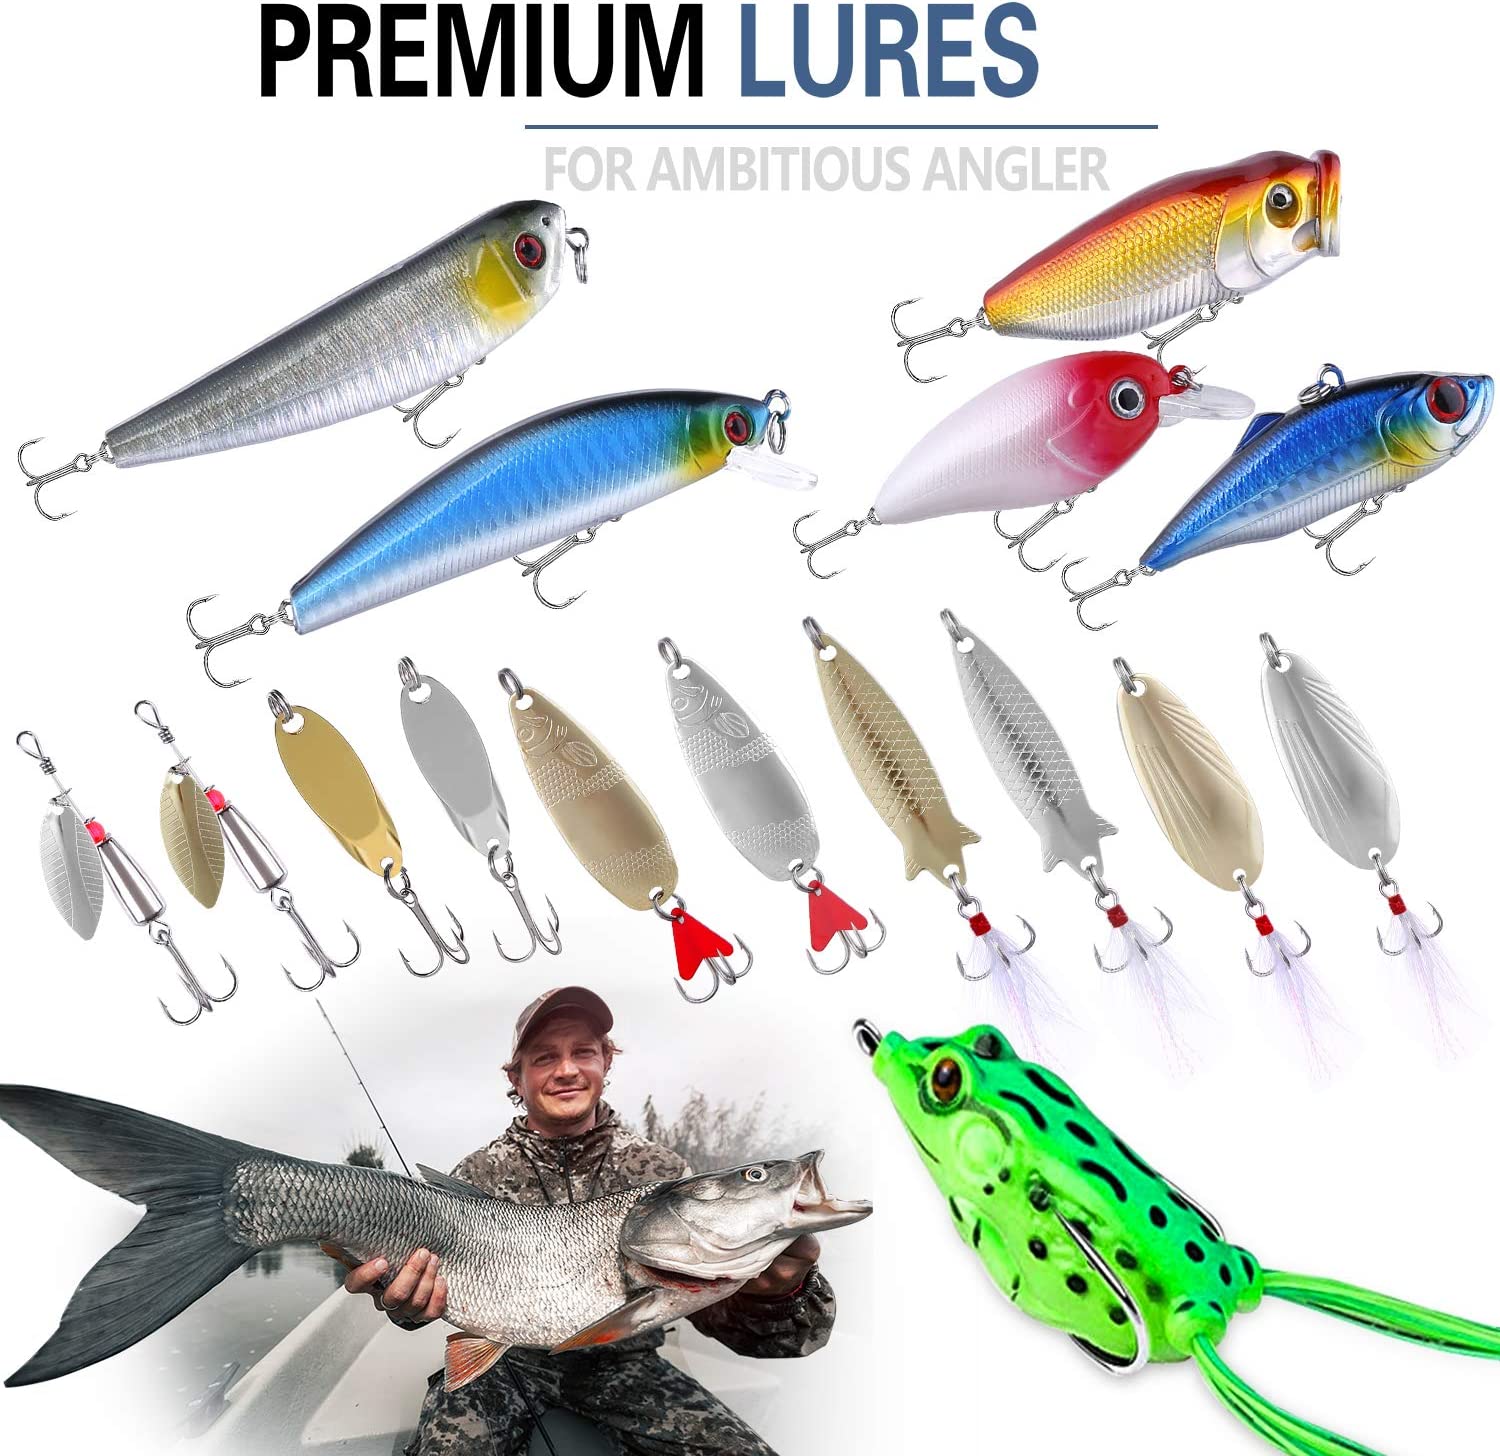 A number of fish shaped fishing lures in varying sizes and colors. There is an inset image of a man holding a large fish.